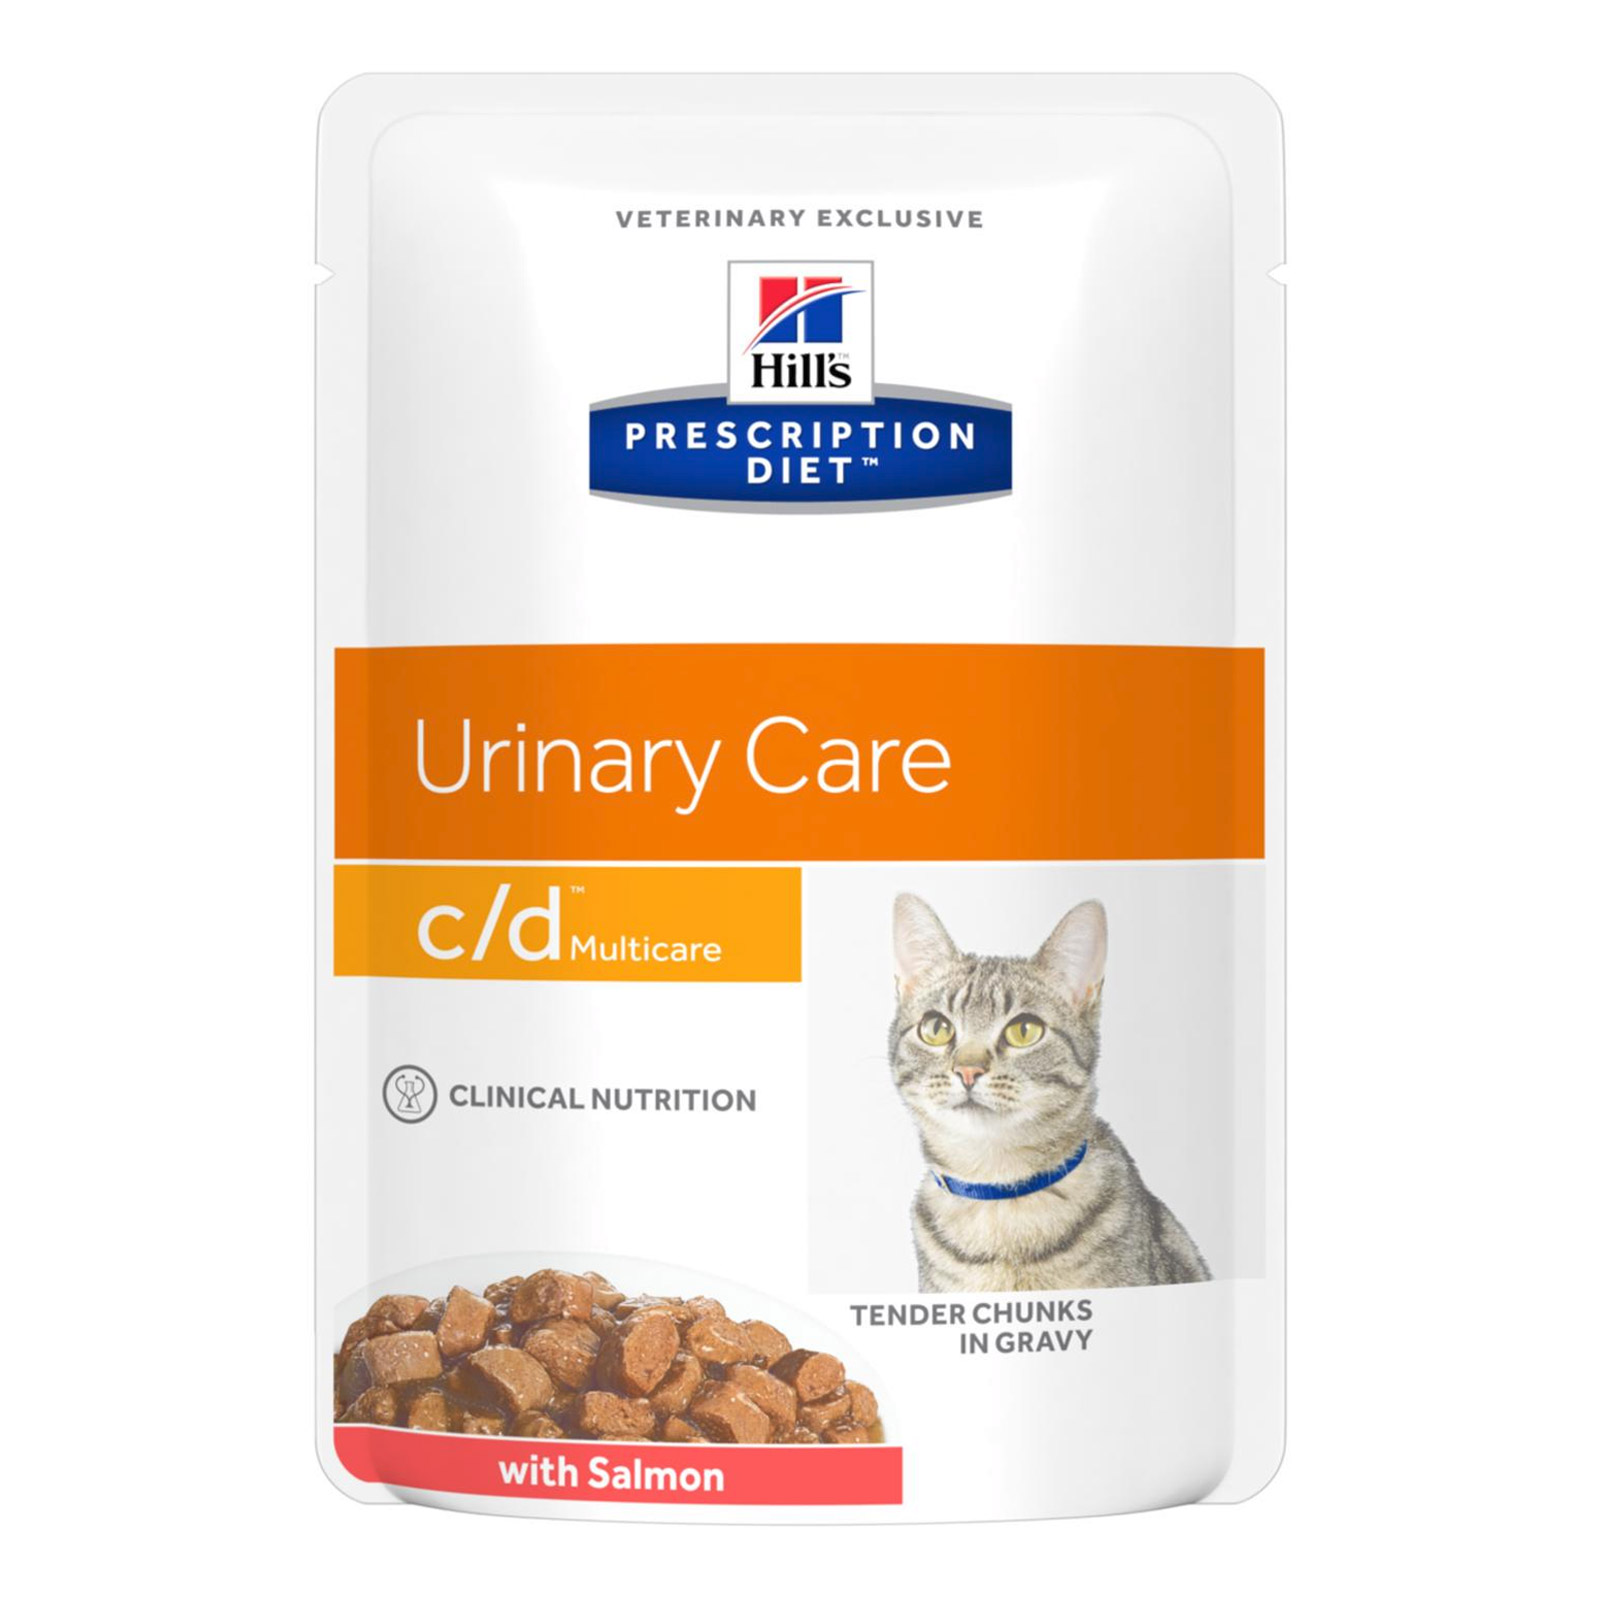 Hill's Prescription Diet c/d Multicare with Ocean Fish Dry Cat Food for Food